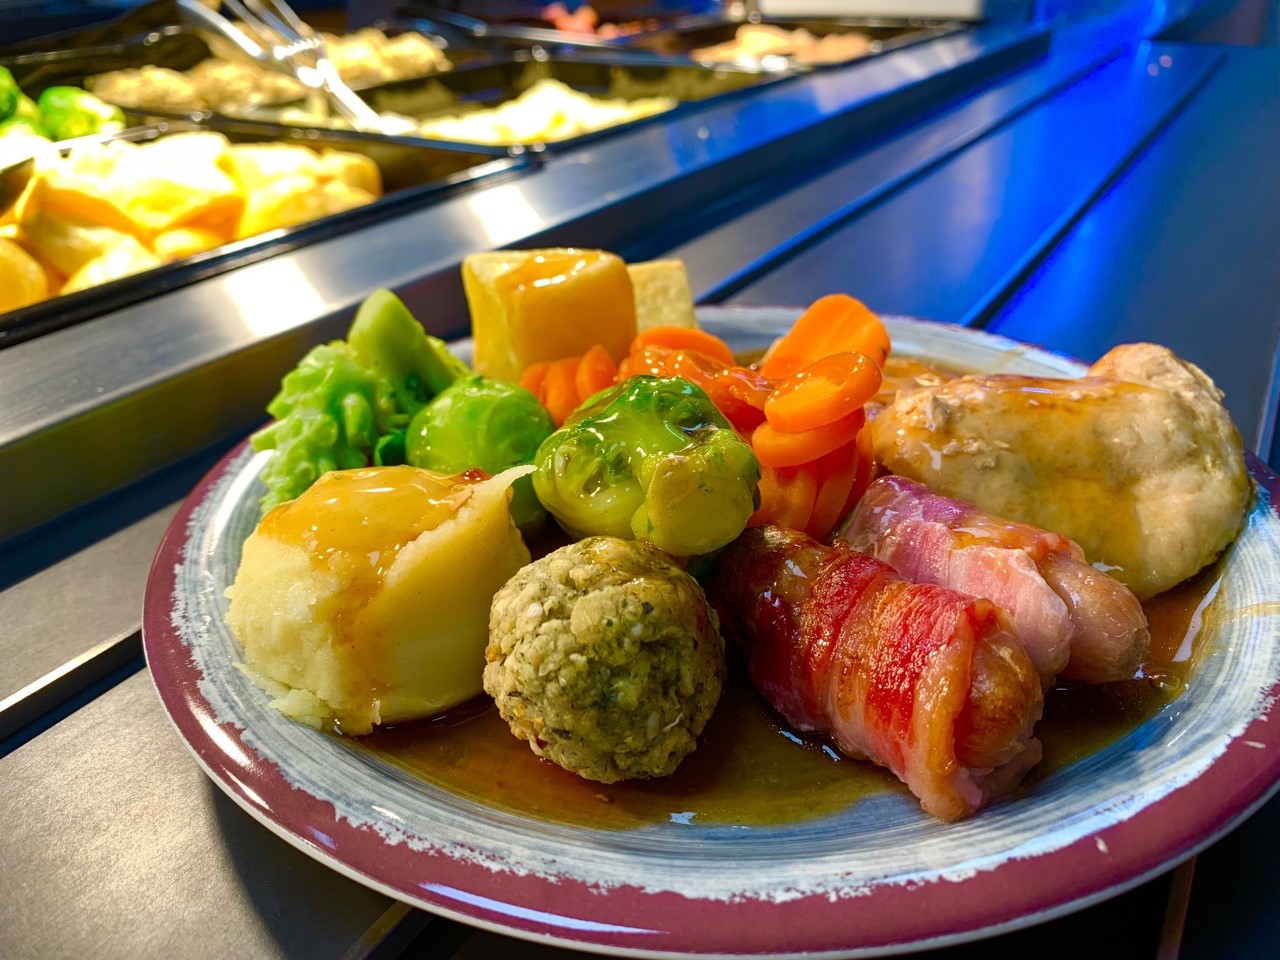 Educaterers treat pupils to a Great British Roast on National School Dinner Day